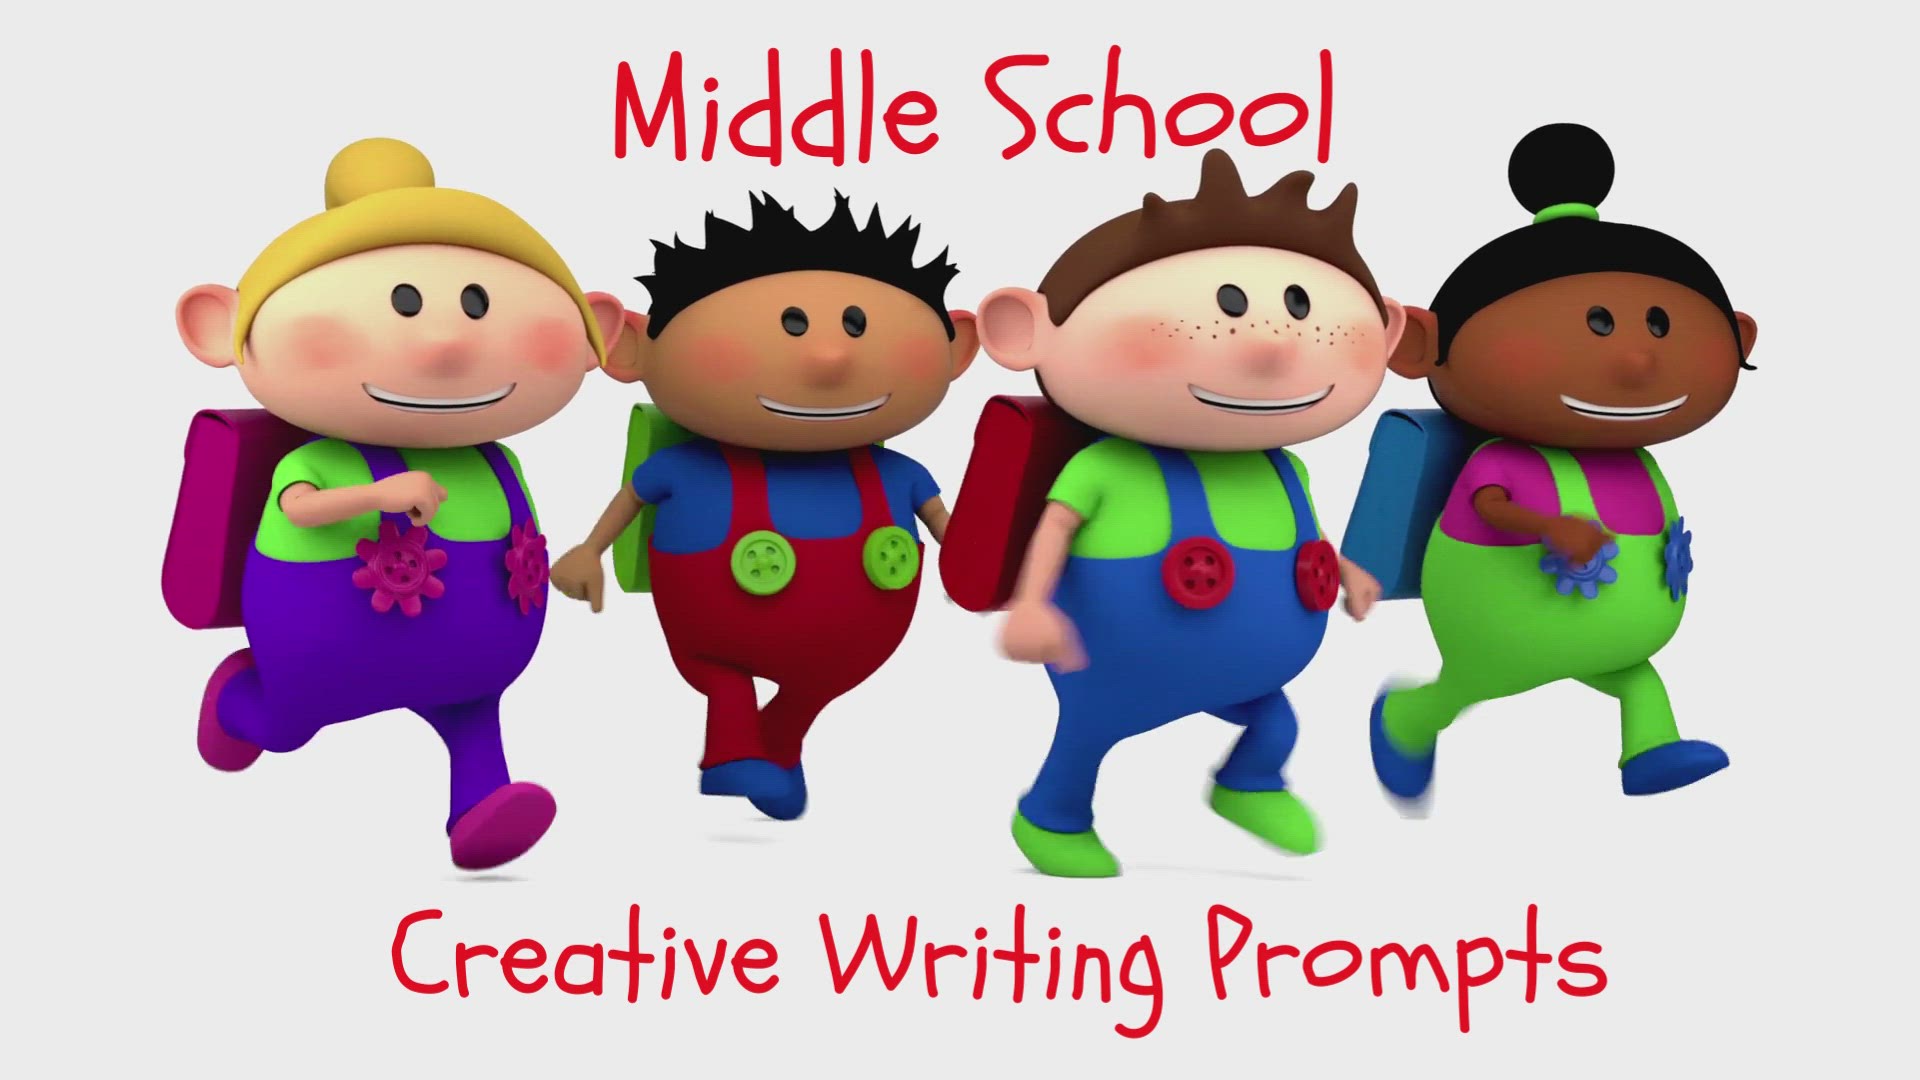 'Video thumbnail for Creative Writing Prompts for Middle School'